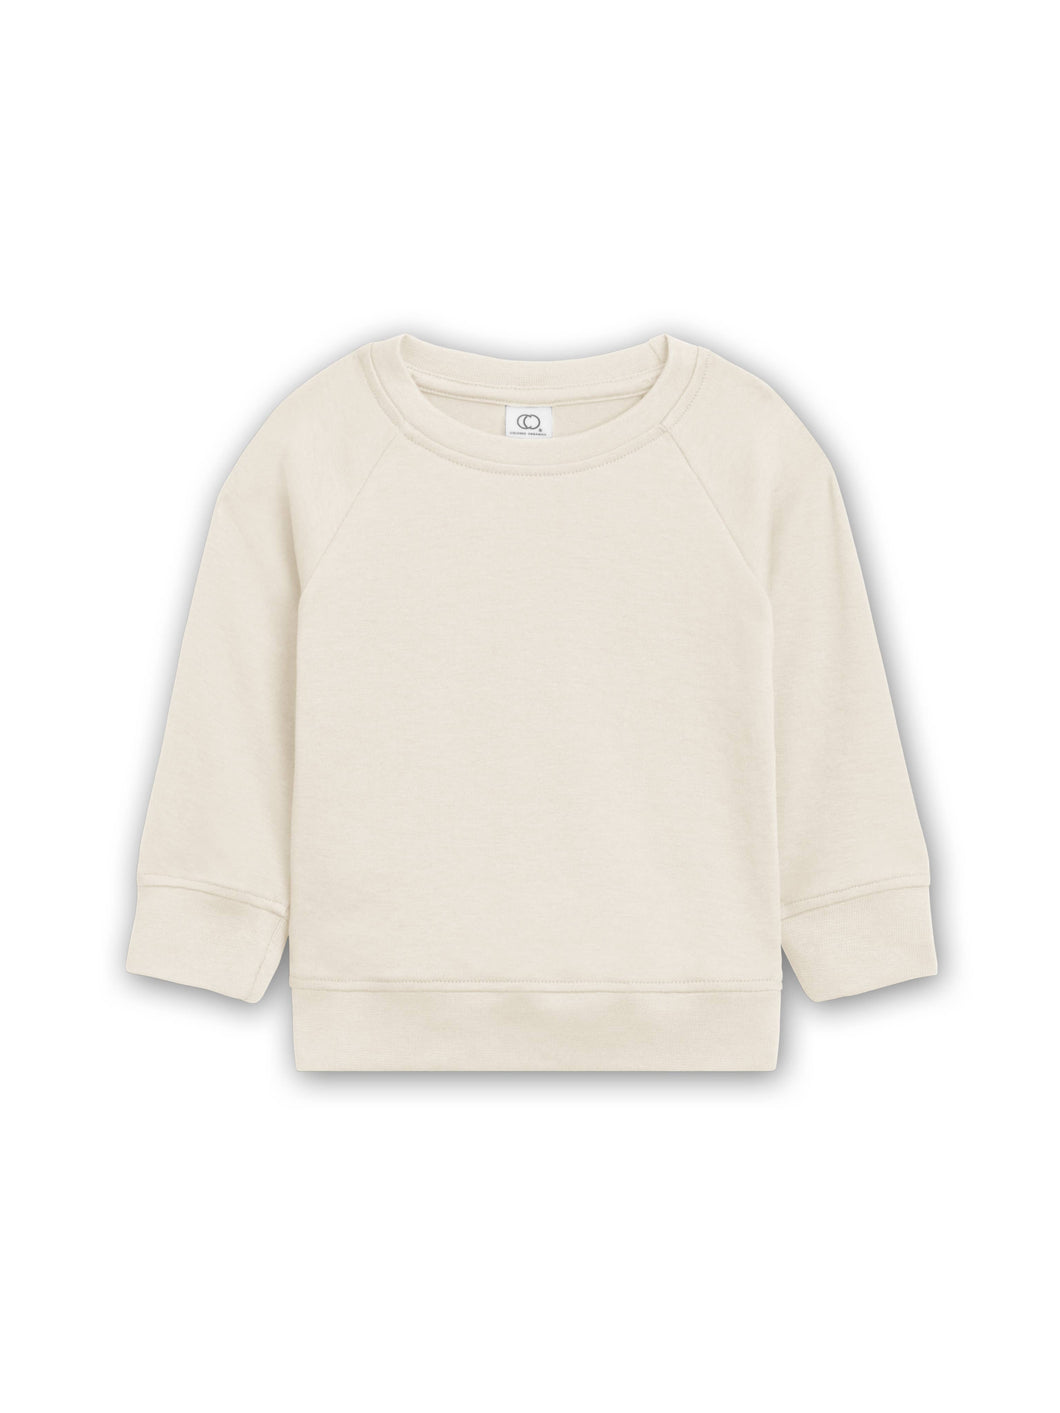 Organic Baby and Kids Portland Pullover - Natural: 2T